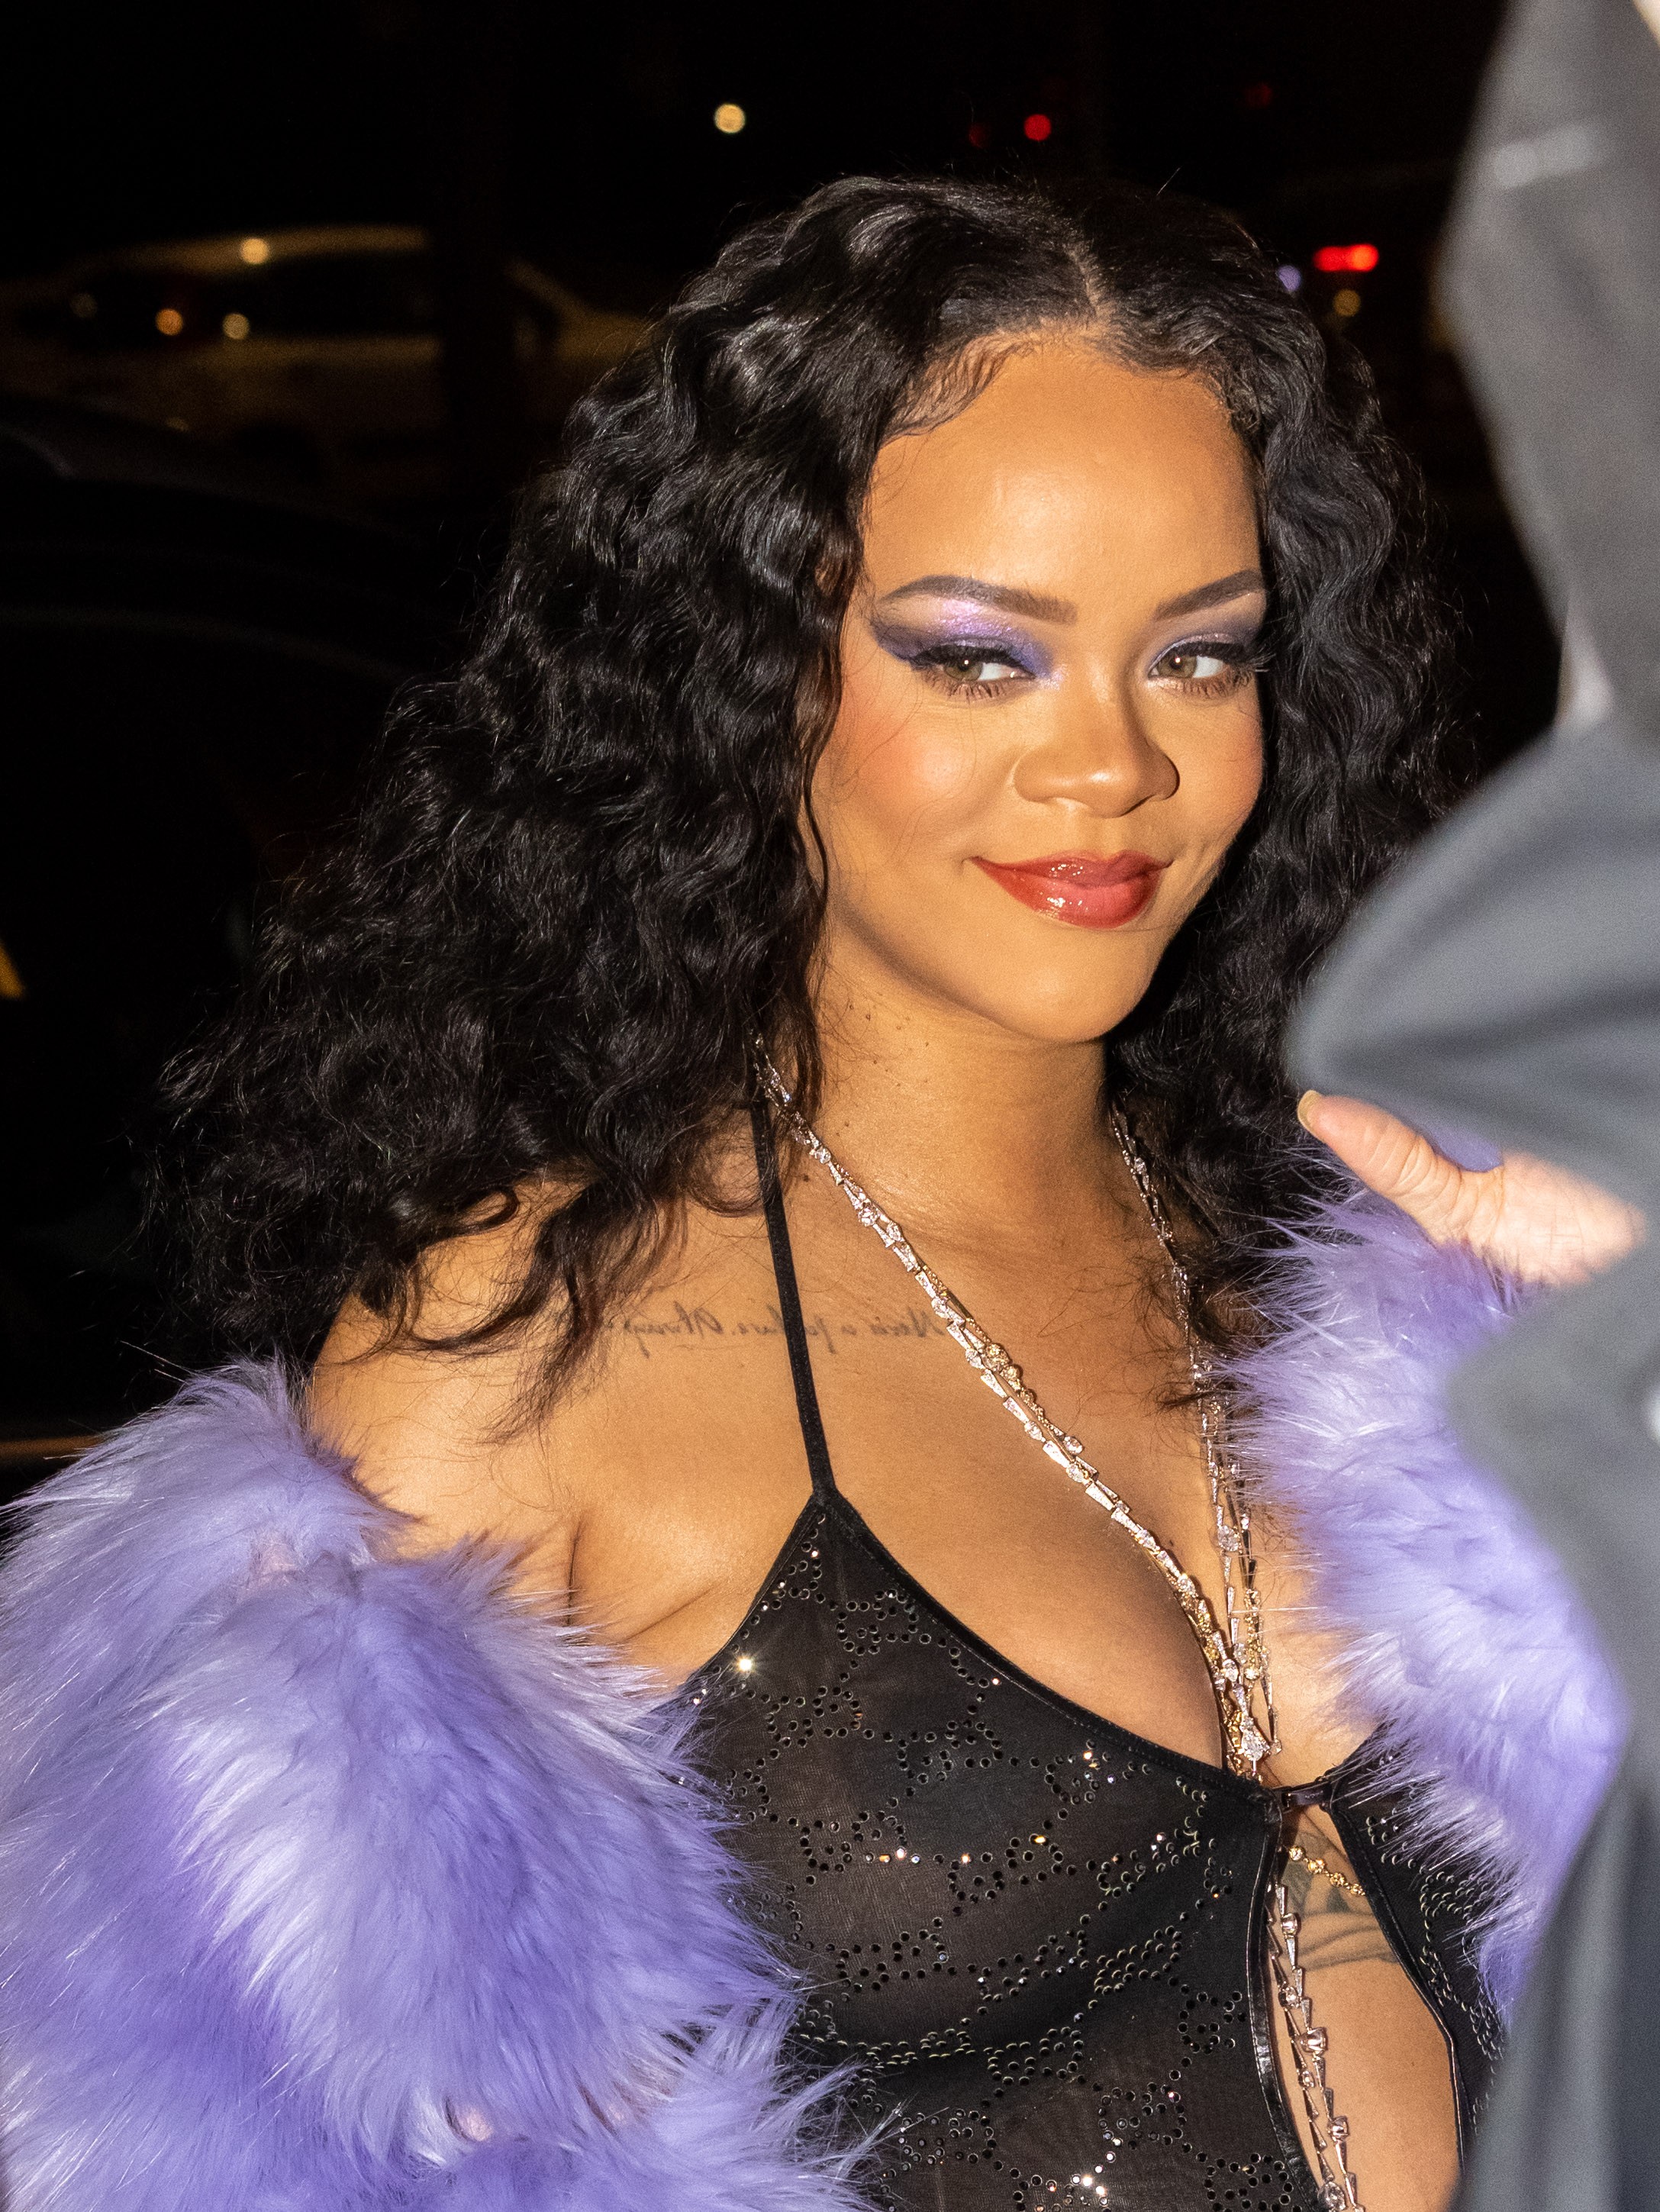 MILAN, ITALY - FEBRUARY 25: (EDITORS NOTE: Image contains partial nudity) Rihanna is seen during the Milan Fashion Week Fall/Winter 2022/2023 on February 25, 2022 in Milan, Italy. (Photo by Arnold Jerocki/Getty Images) (Foto: Getty Images)